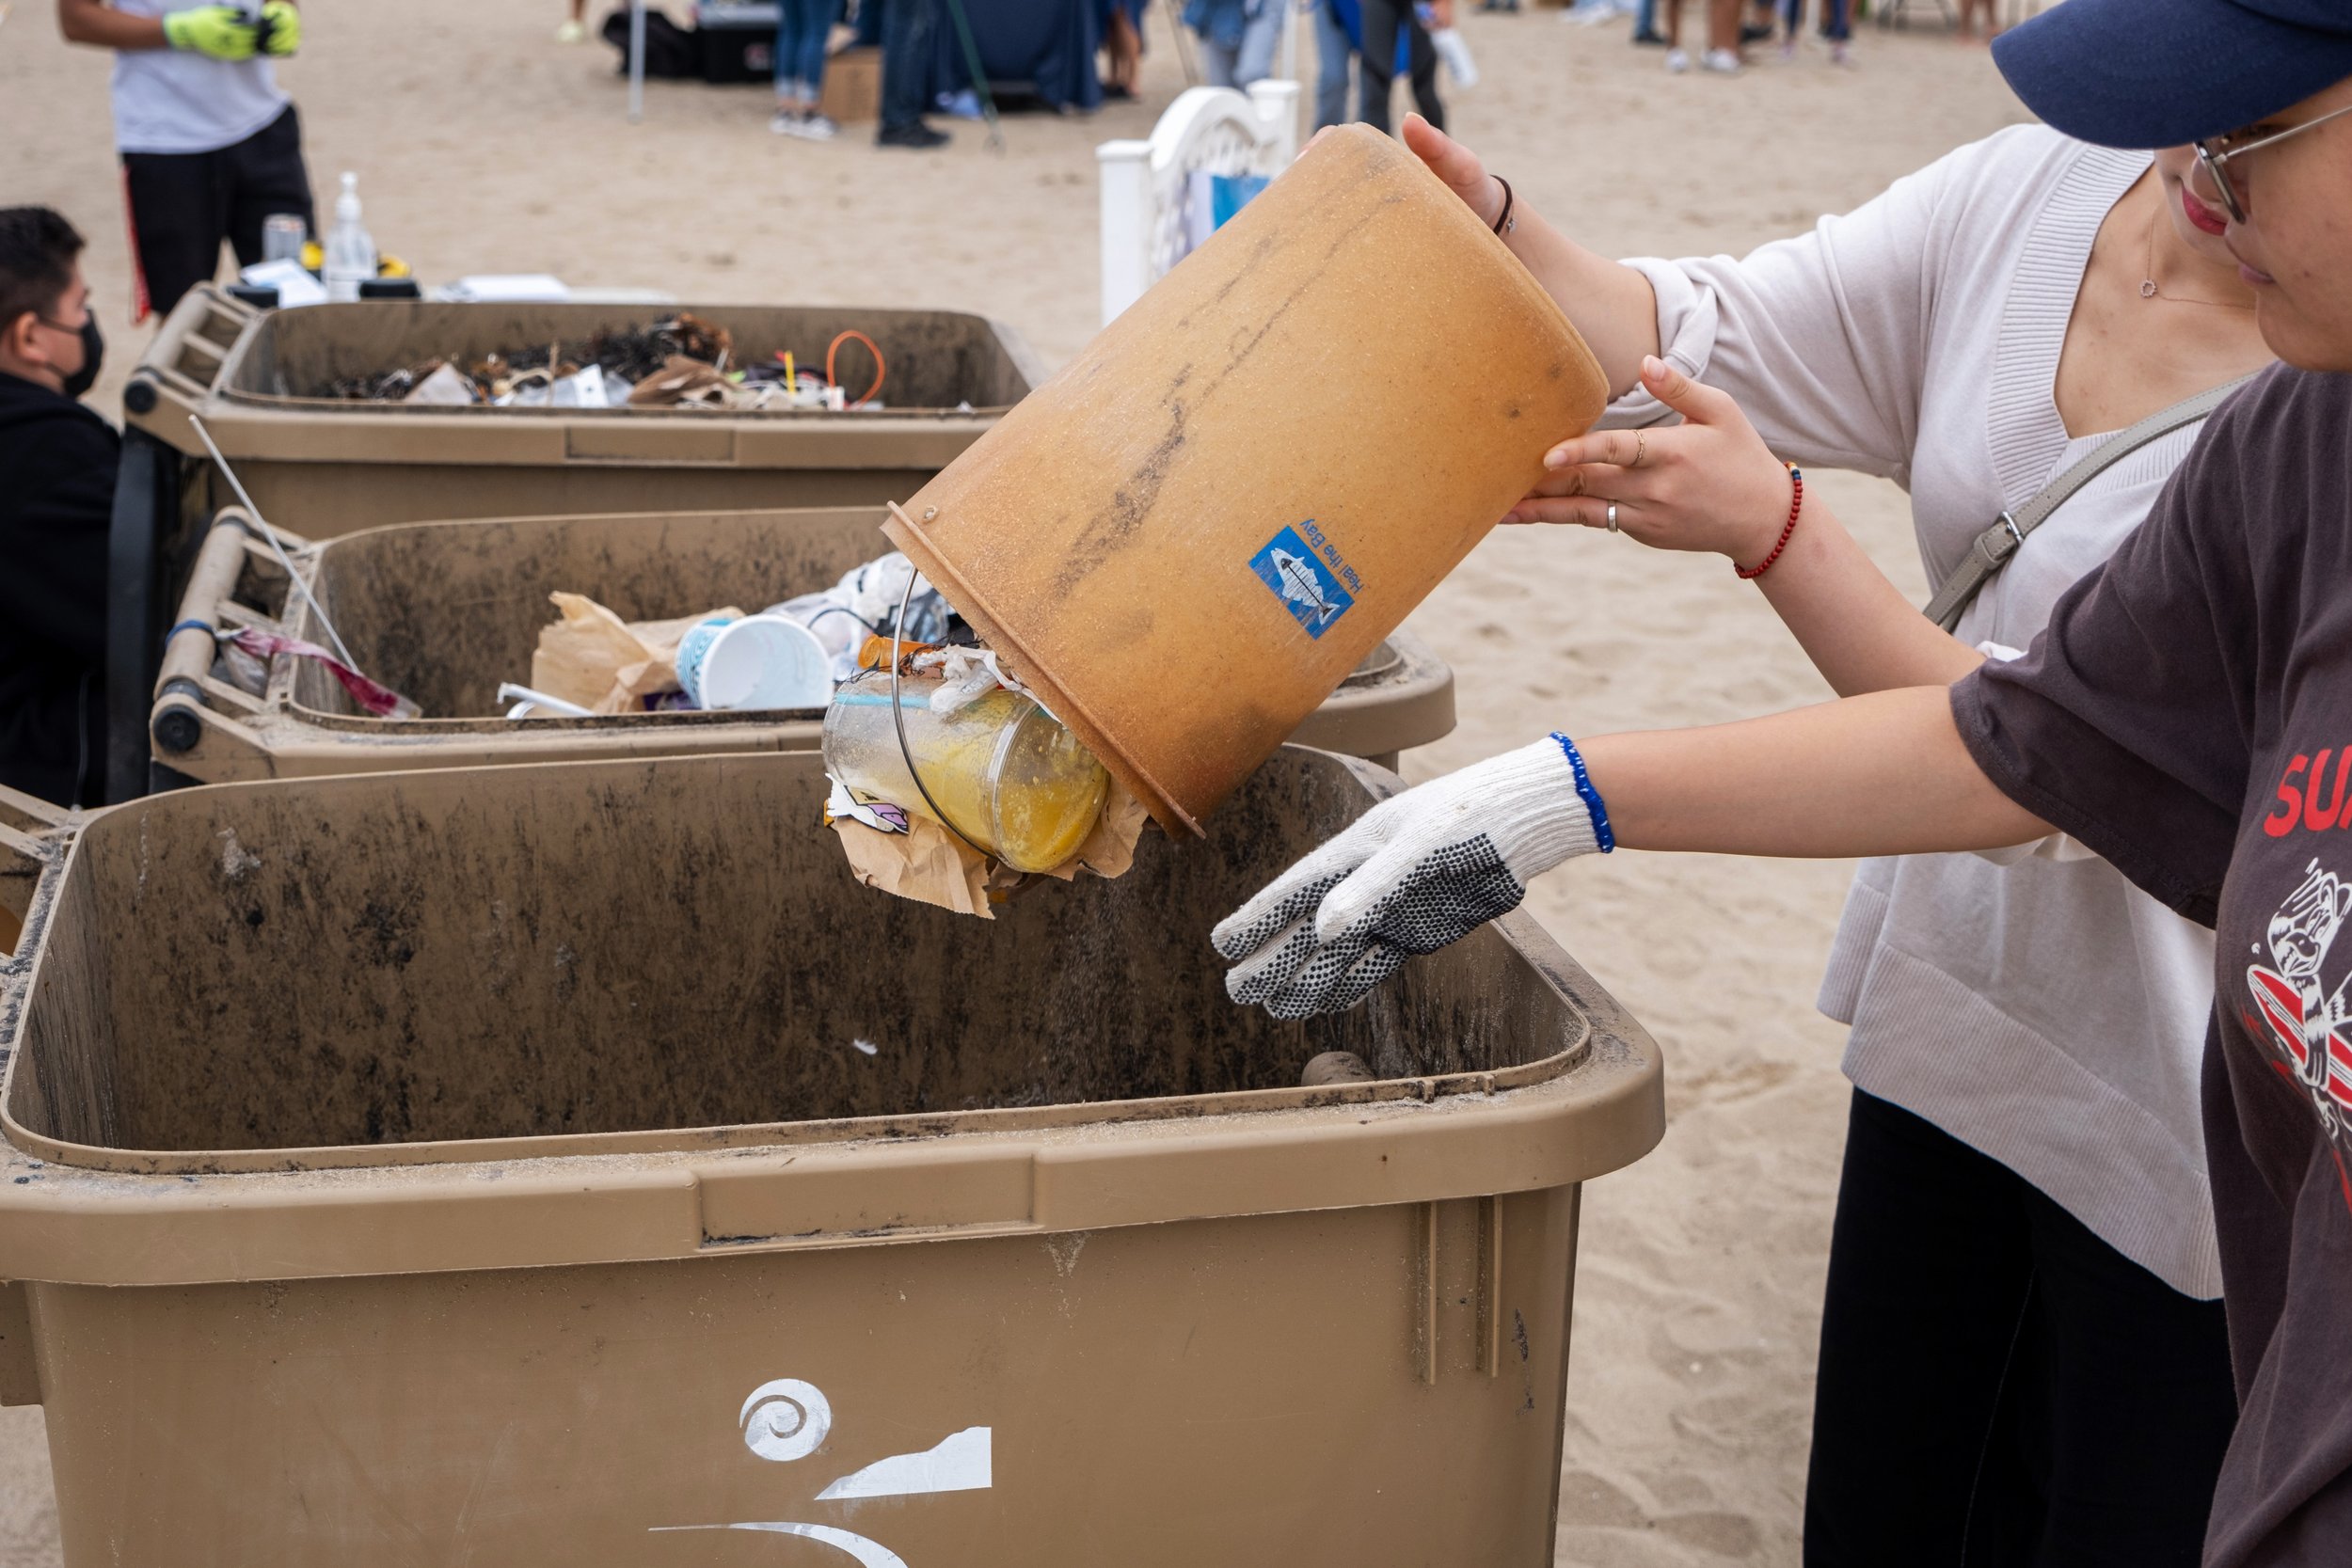  Christy Kim (left) and Eunoh Kim (right) empty a bucket full of garbage they collected along the beach, while participating at the Coastal Cleanup Day, led by Heal The Bay in Santa Monica Calif. on Saturday, September 17, 2022. Christy Kim and Eunoh